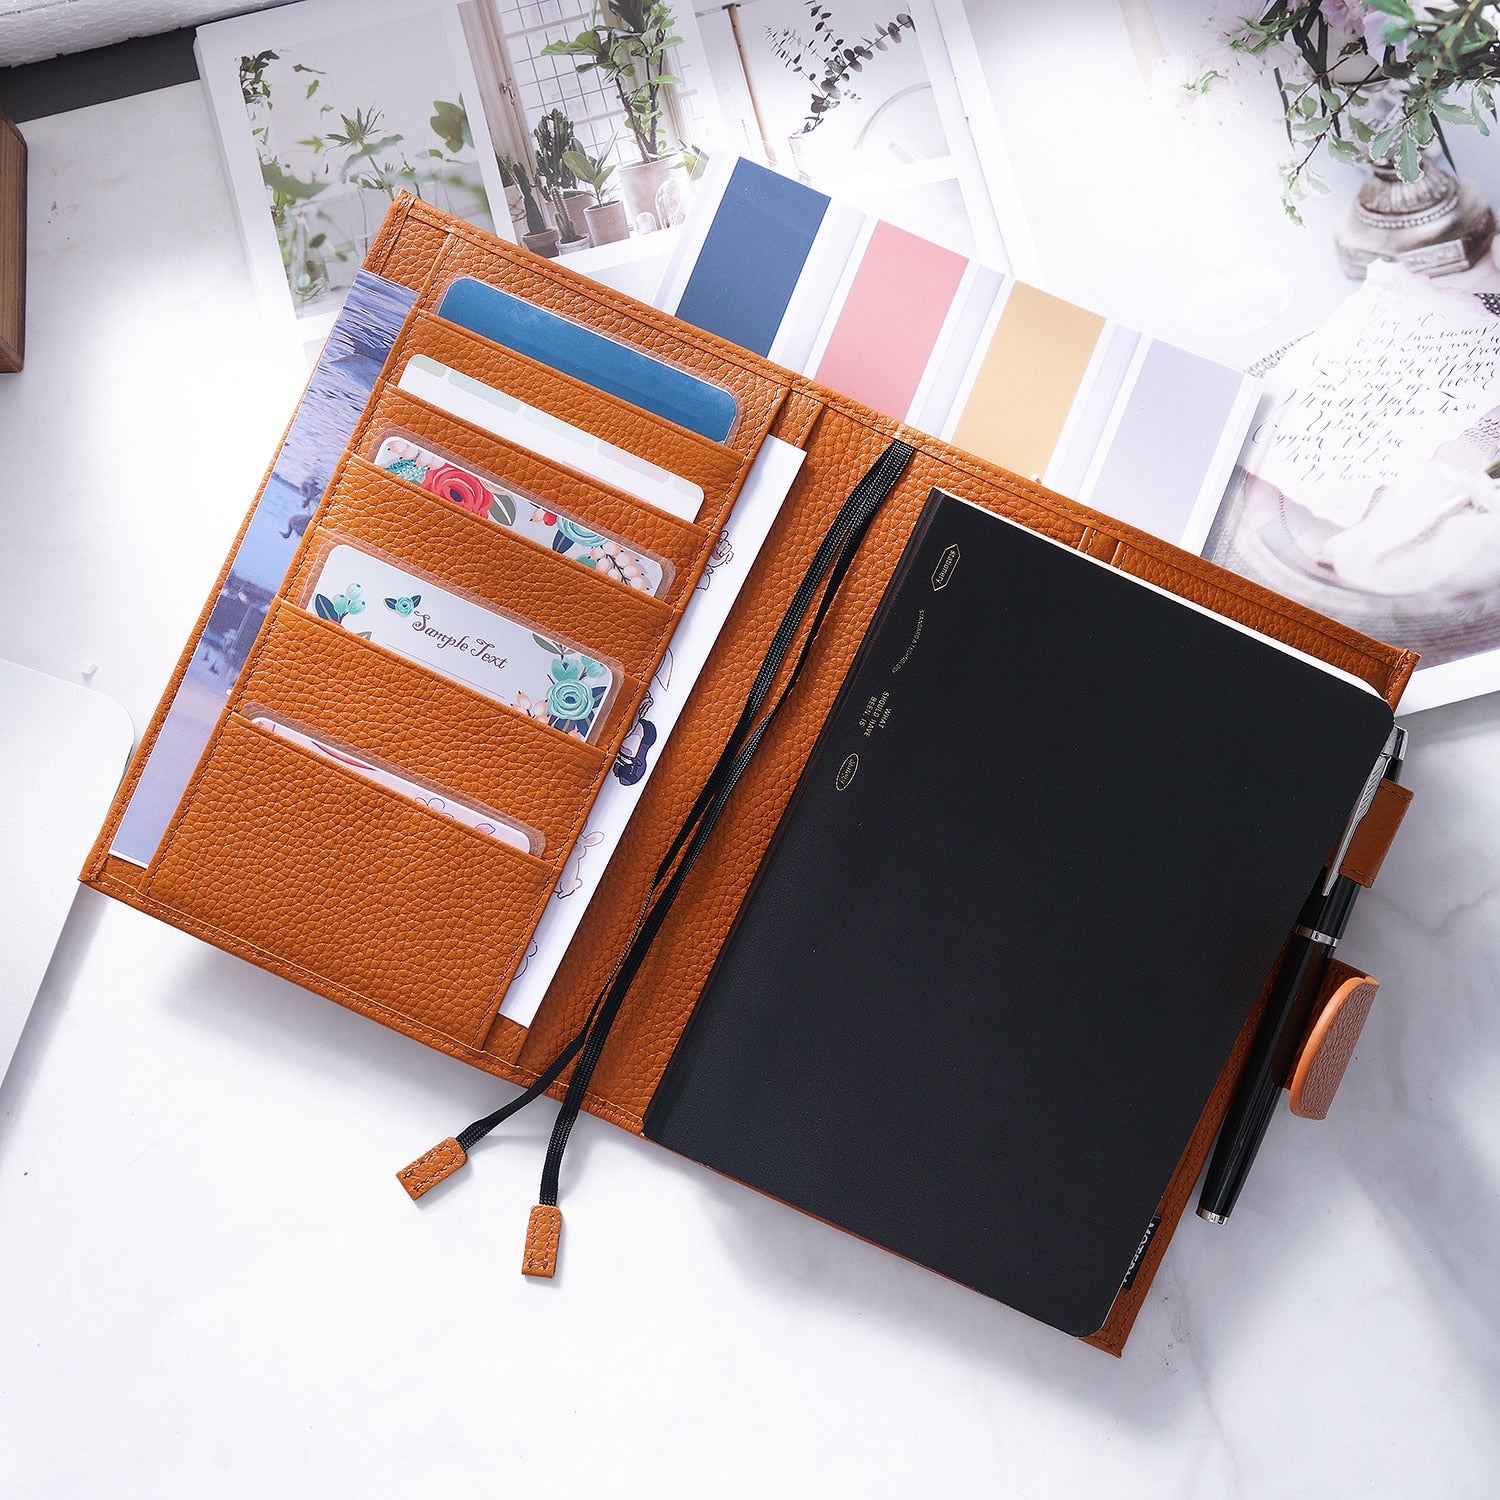 Moterm A5 Plus White Genuine Leather Journal Cover Planner Agenda